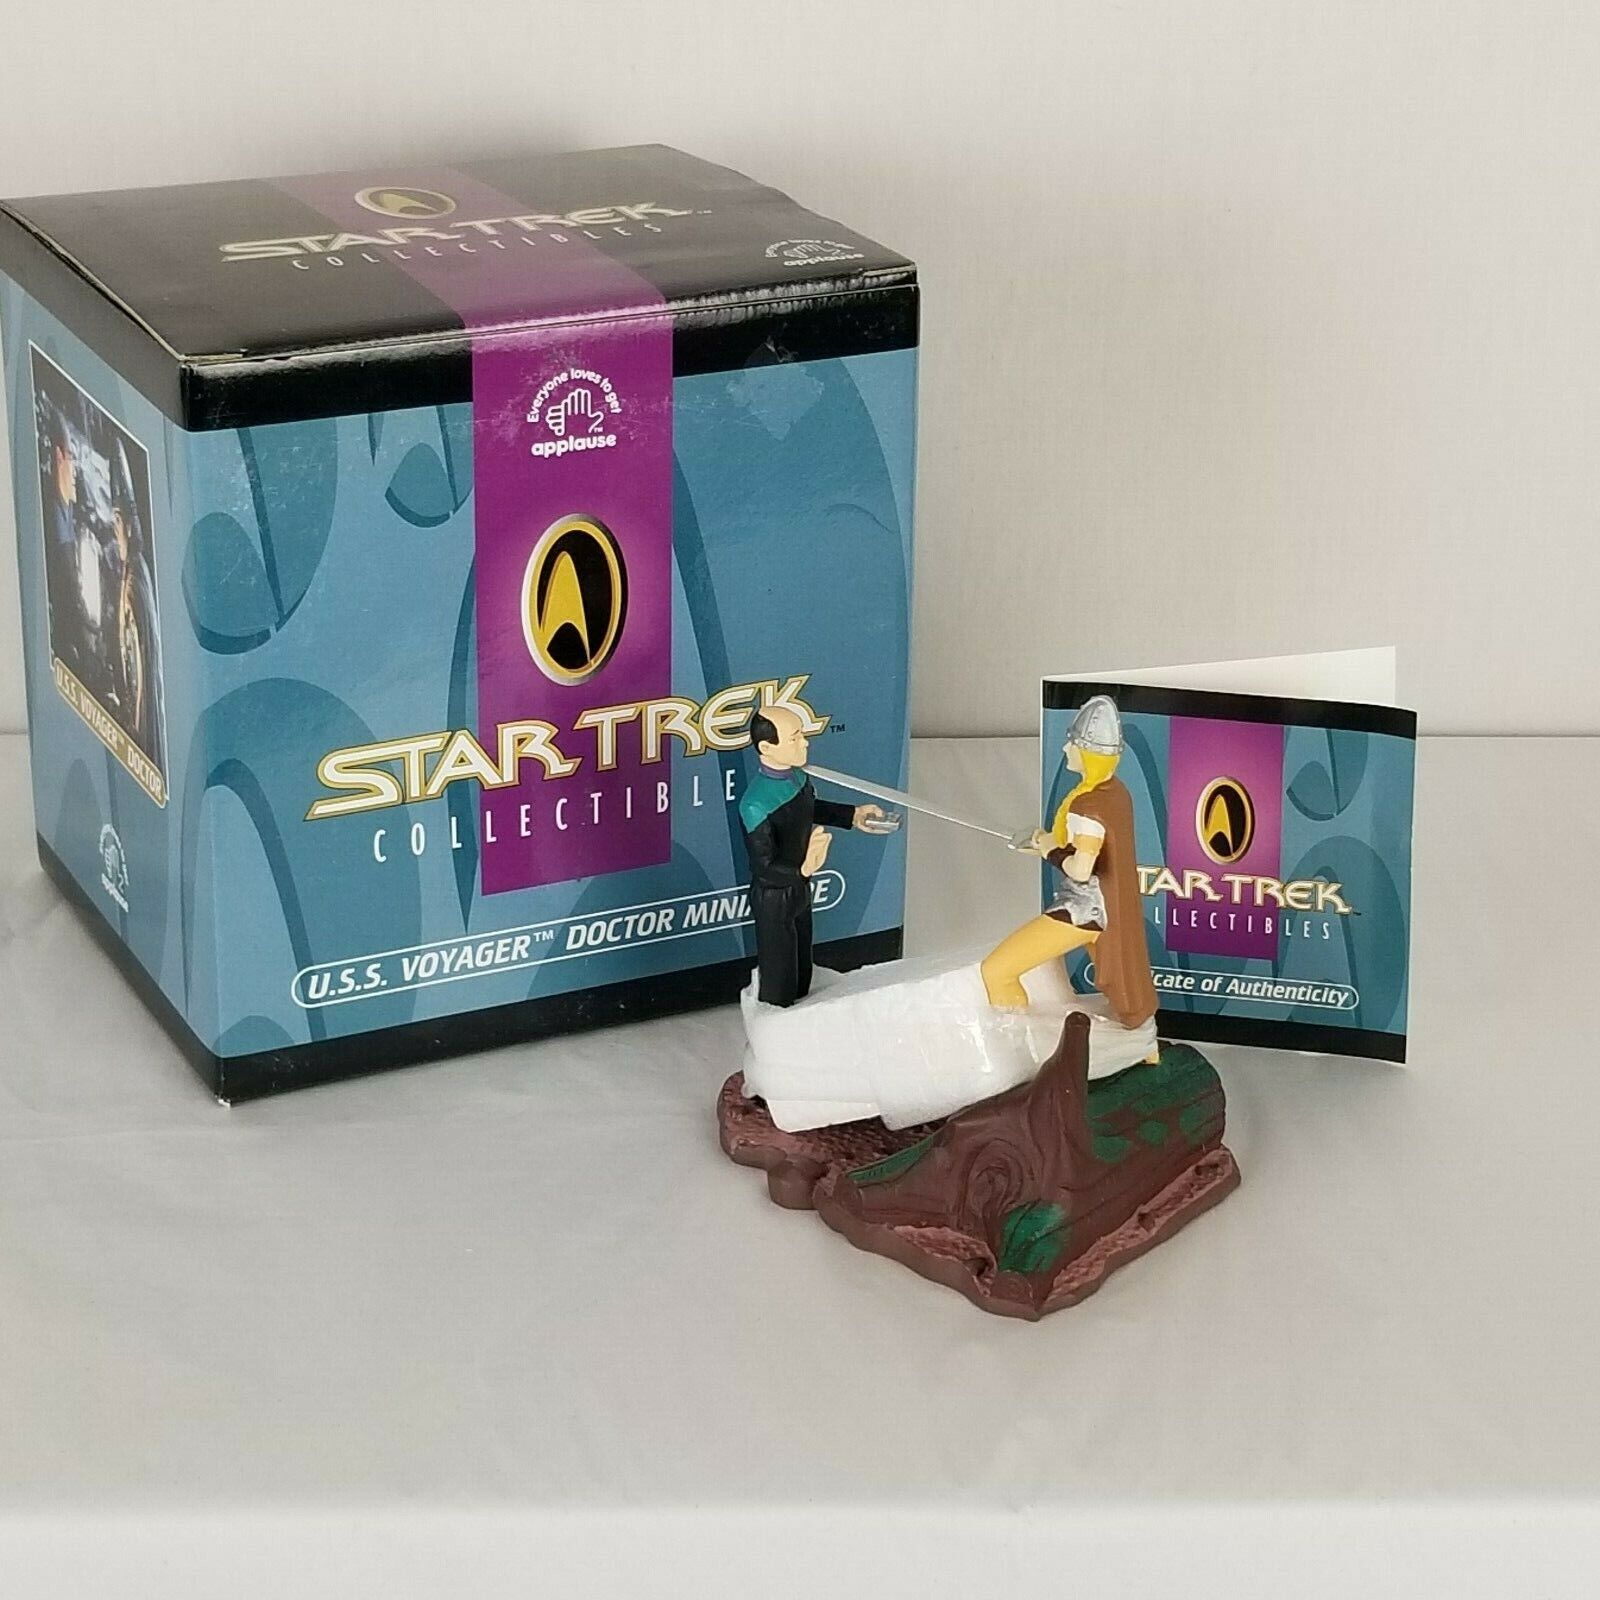 Star Trek Collectibles USS Voyager Doctor Miniature Applause 1997 